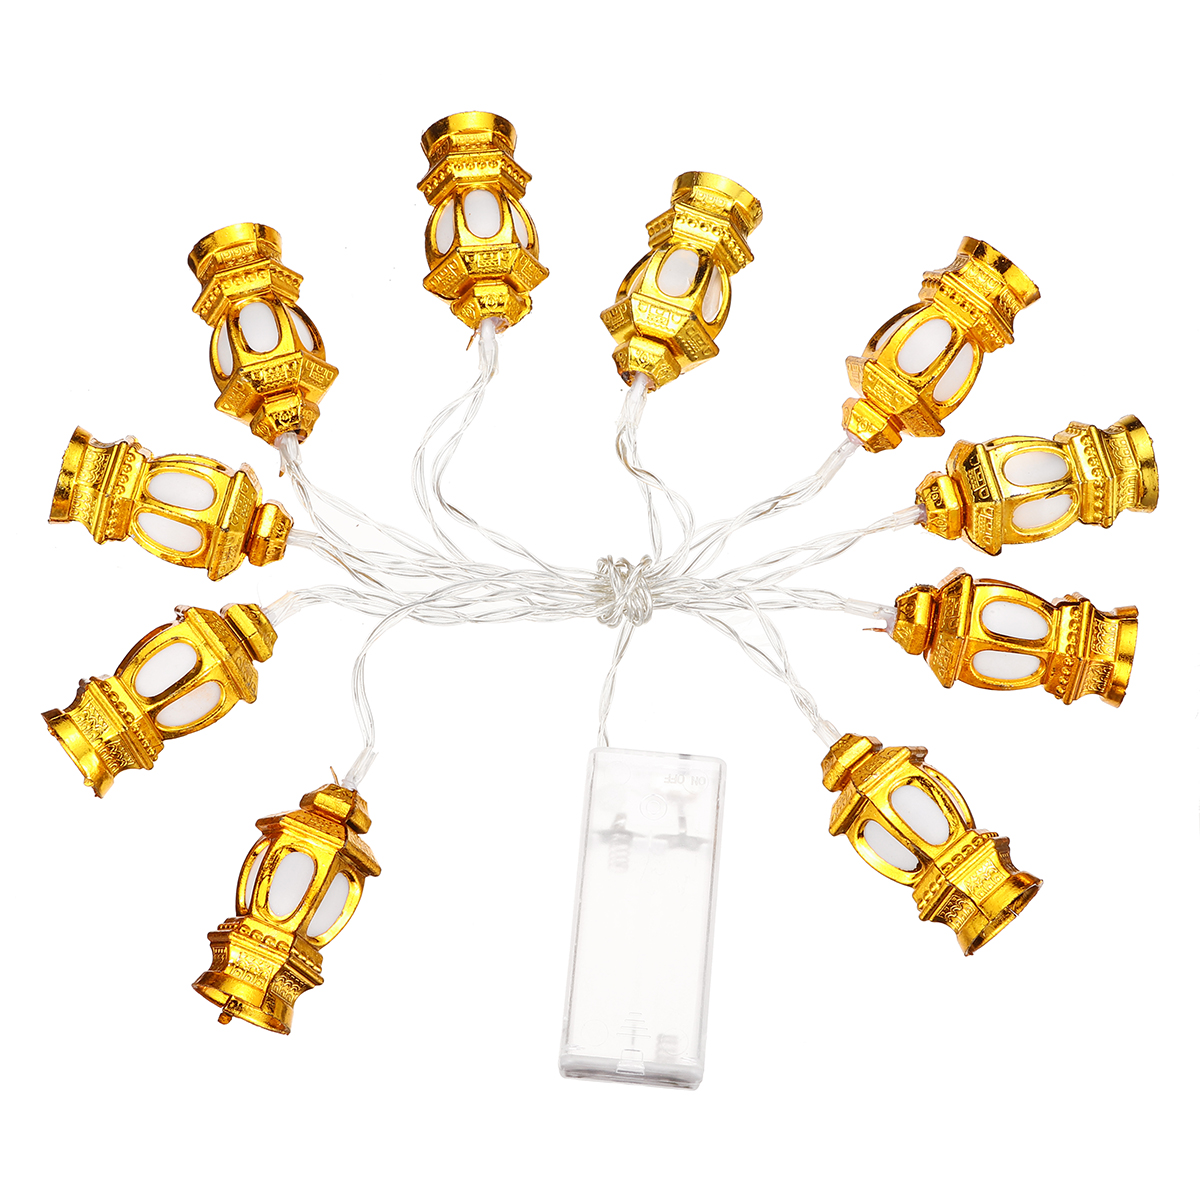 165M-Gold-Oil-Lamp-Battery-Powered-10LED-Fairy-String-Light-for-Holiday-Christmas-Indoor-Home-Decora-1547524-1